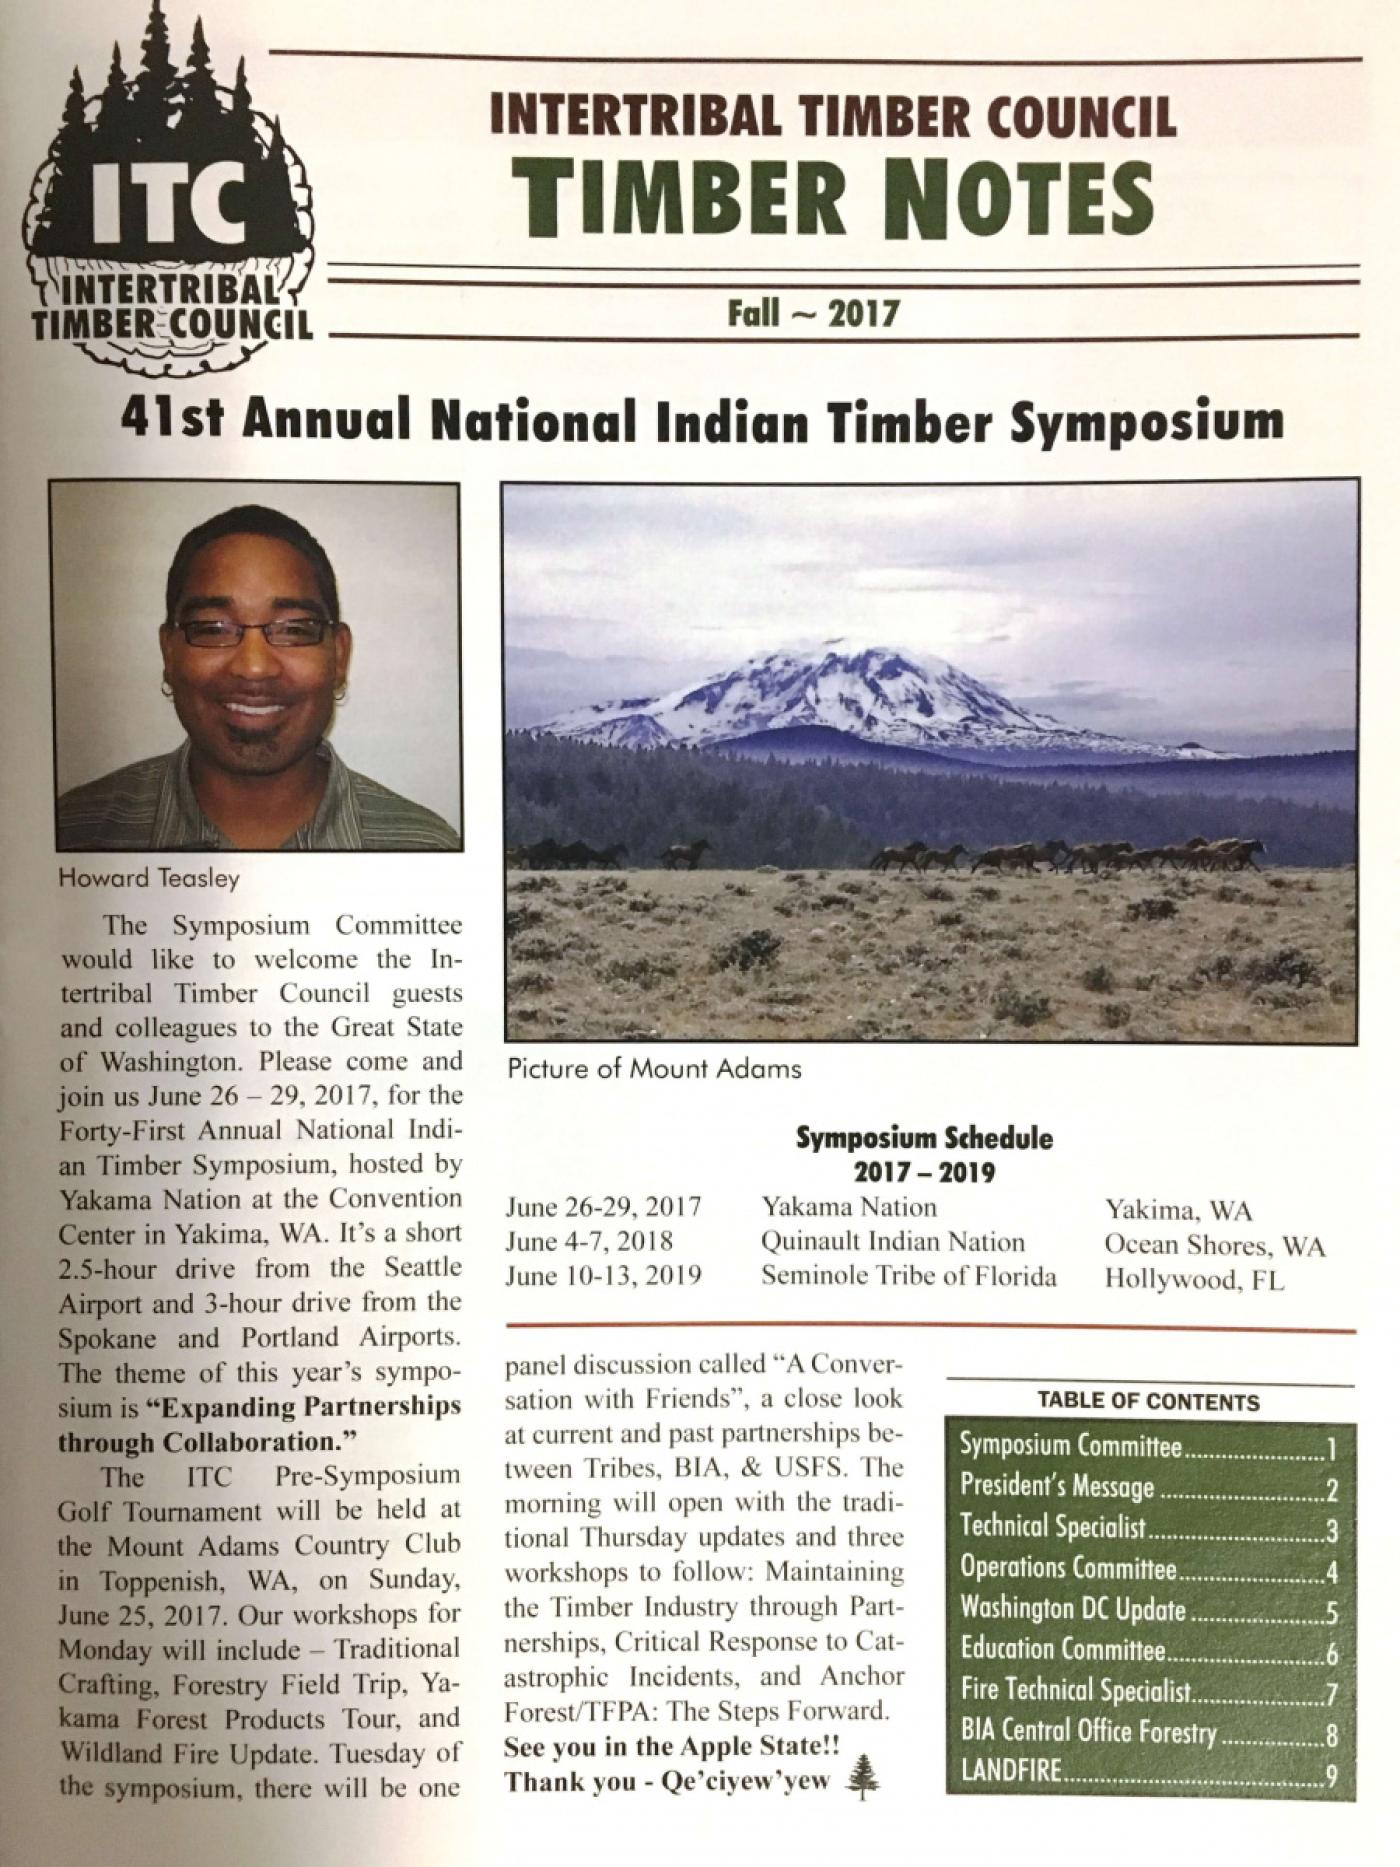 A scan of the one-page Intertribal Timber Council's Timber Notes Fall 2017 issue.